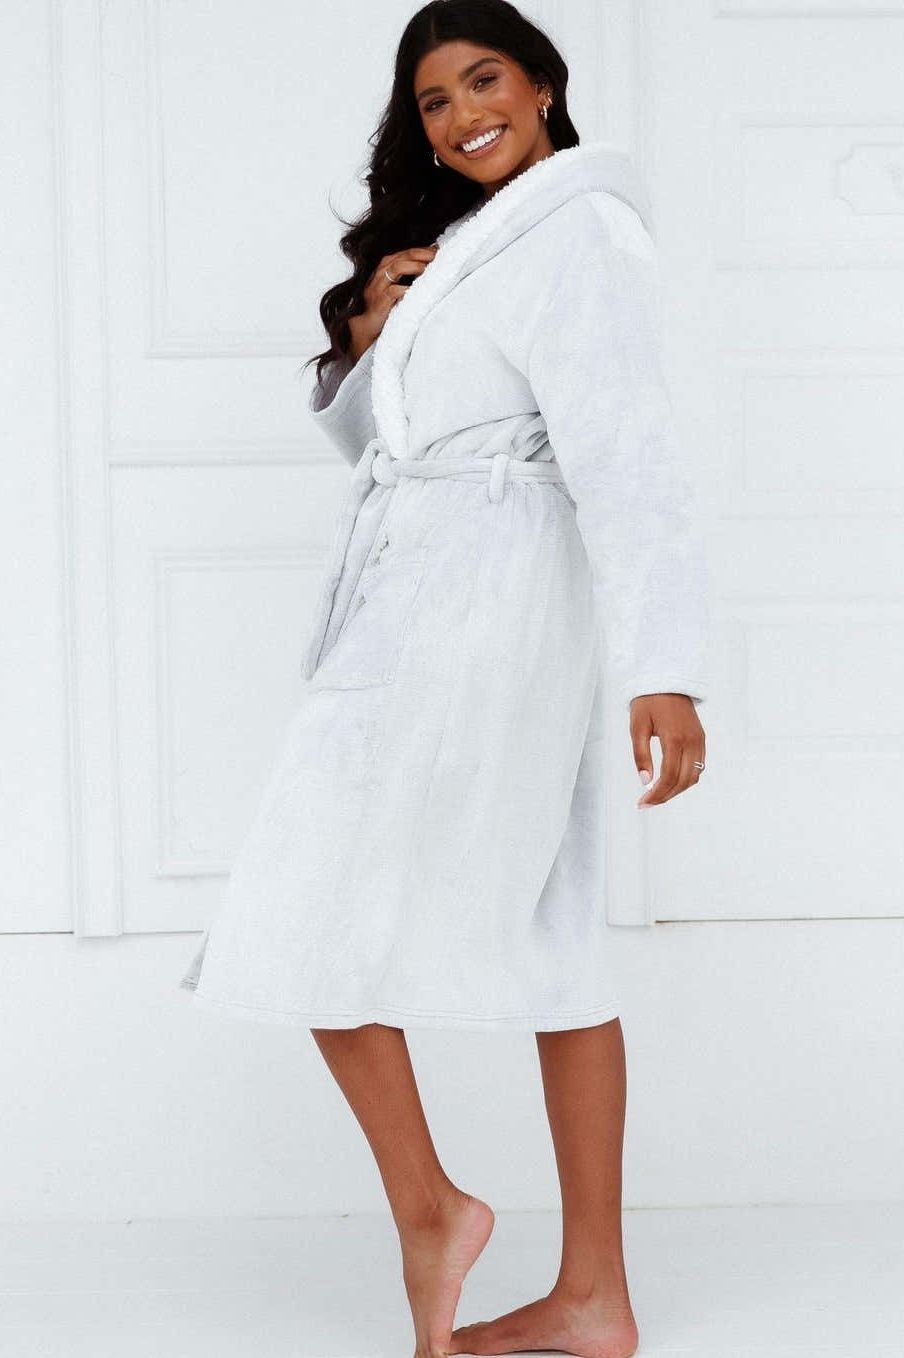 Skims Soft Lounge Robe In Stock Availability and Price Tracking